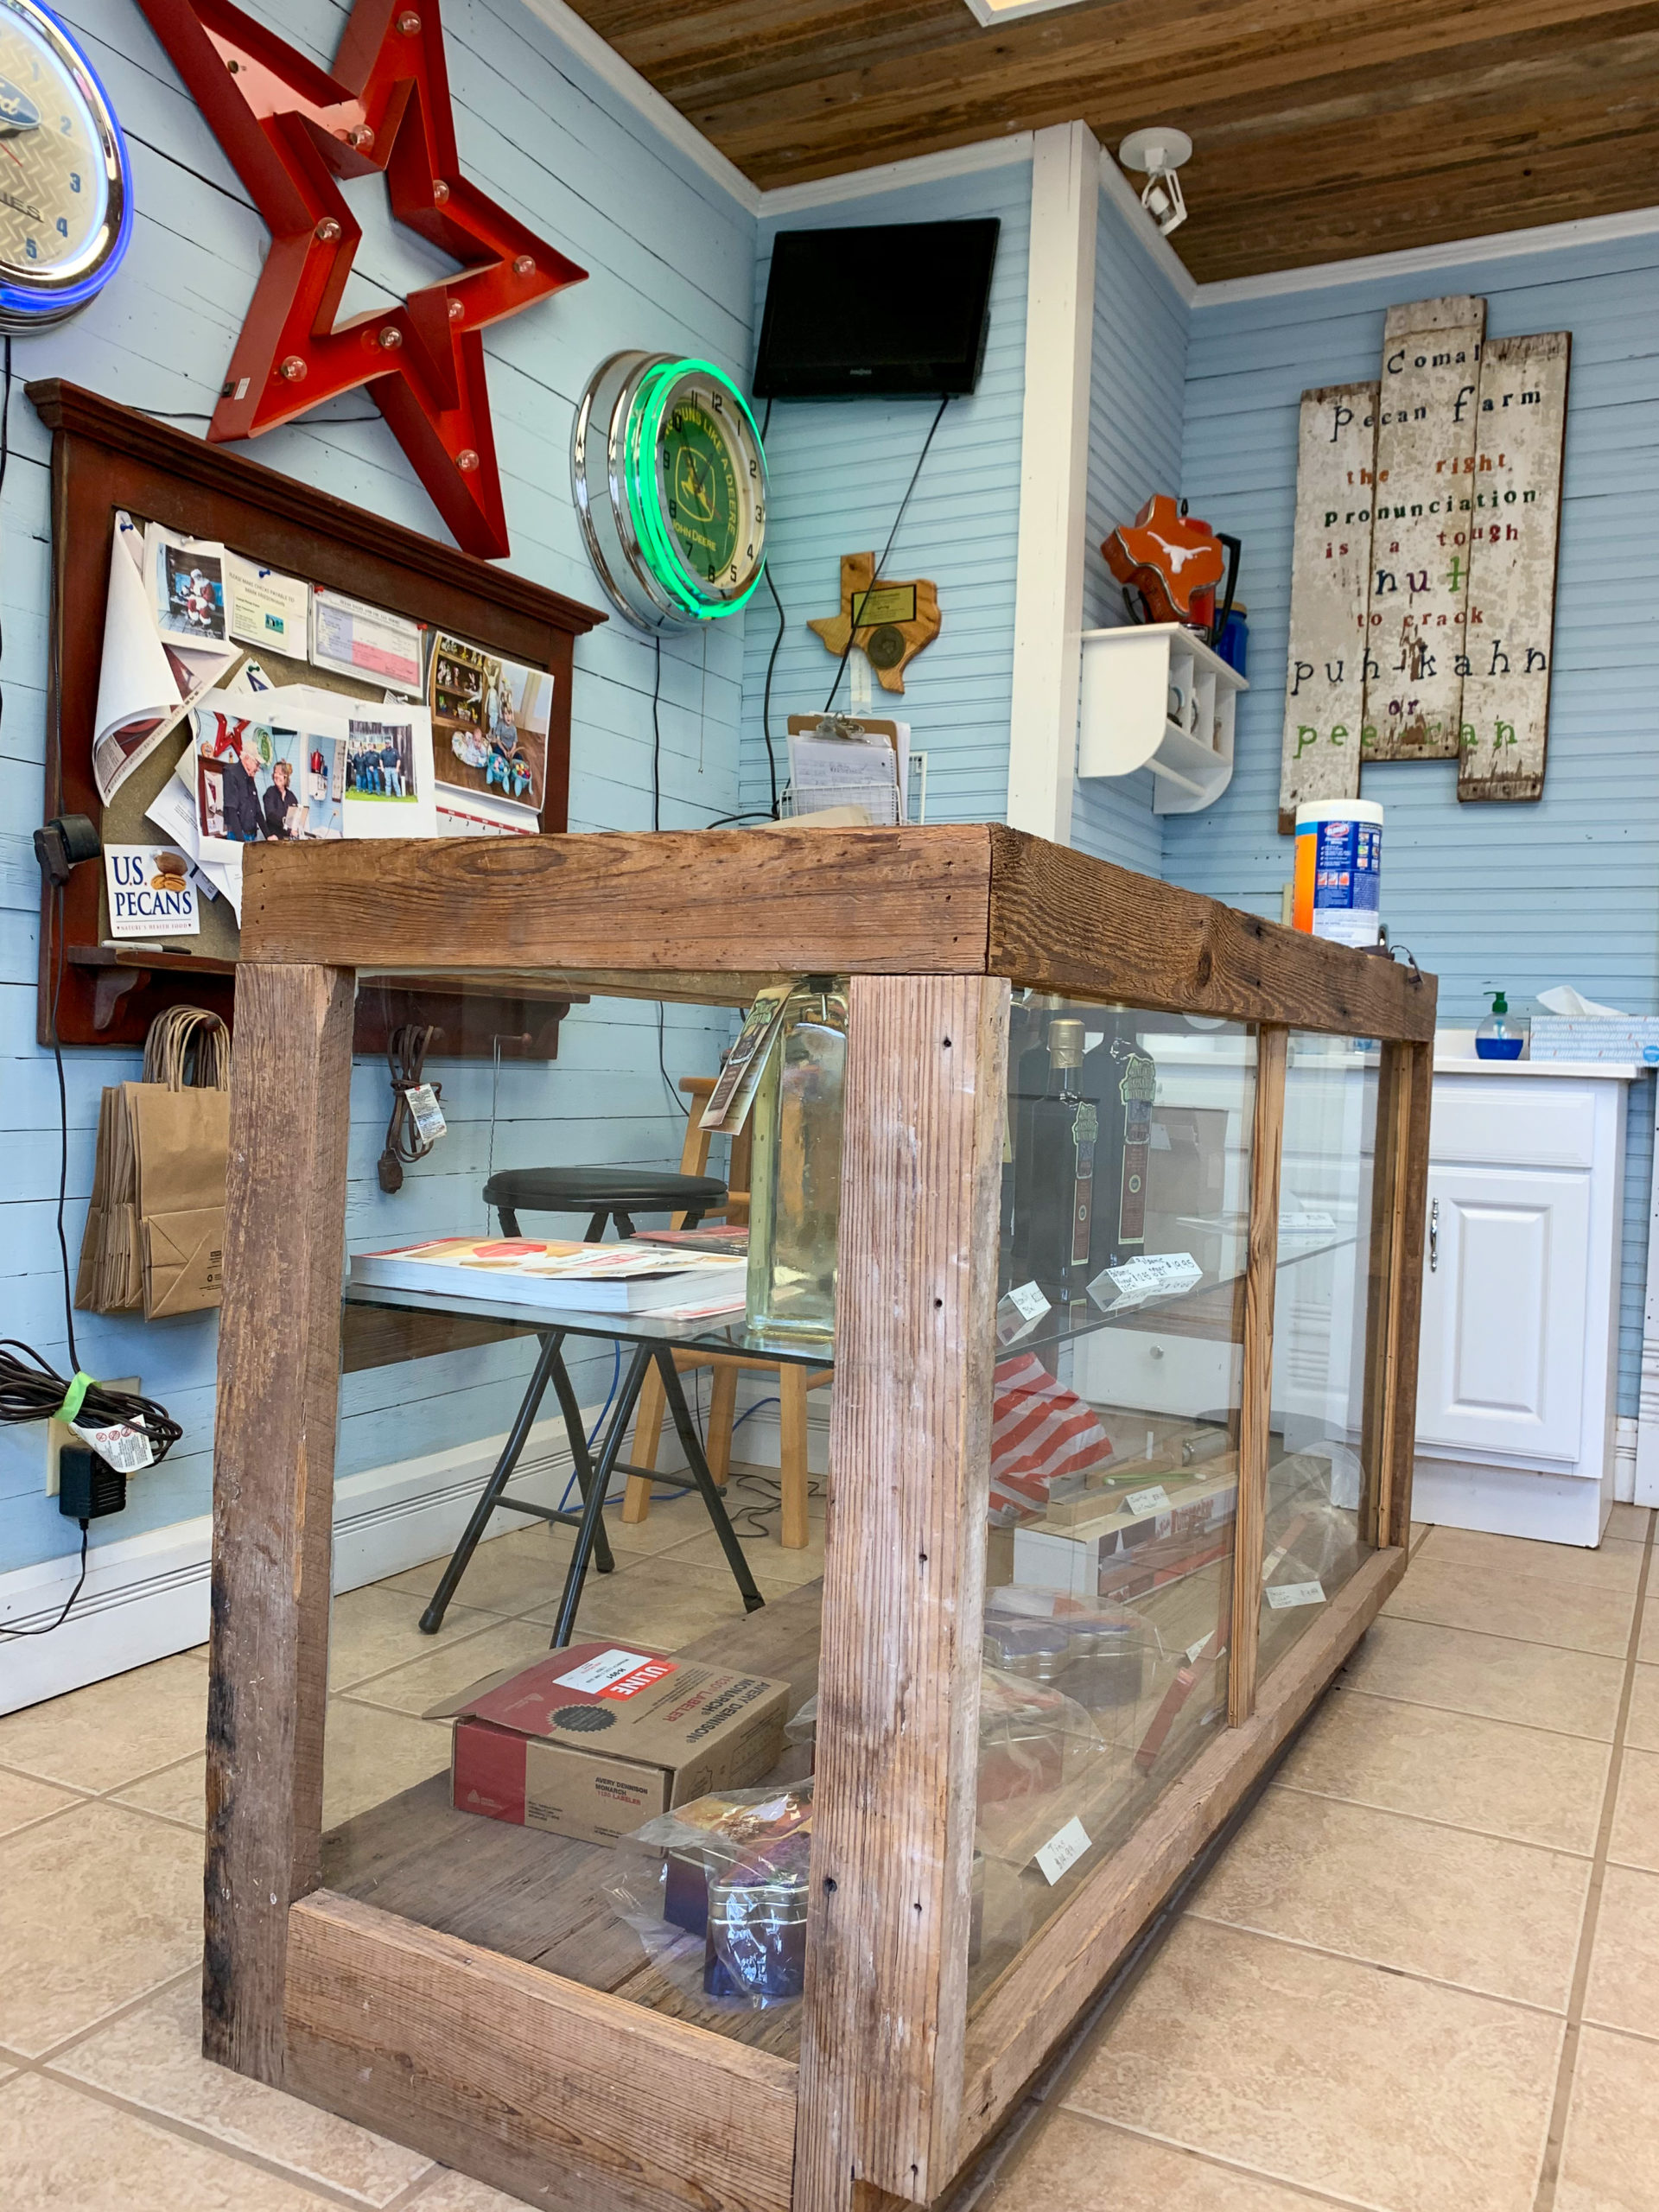 The check out counter at the Comal Pecan Farm retail store that grower Mark Friesenhahn installed to diversify his business.